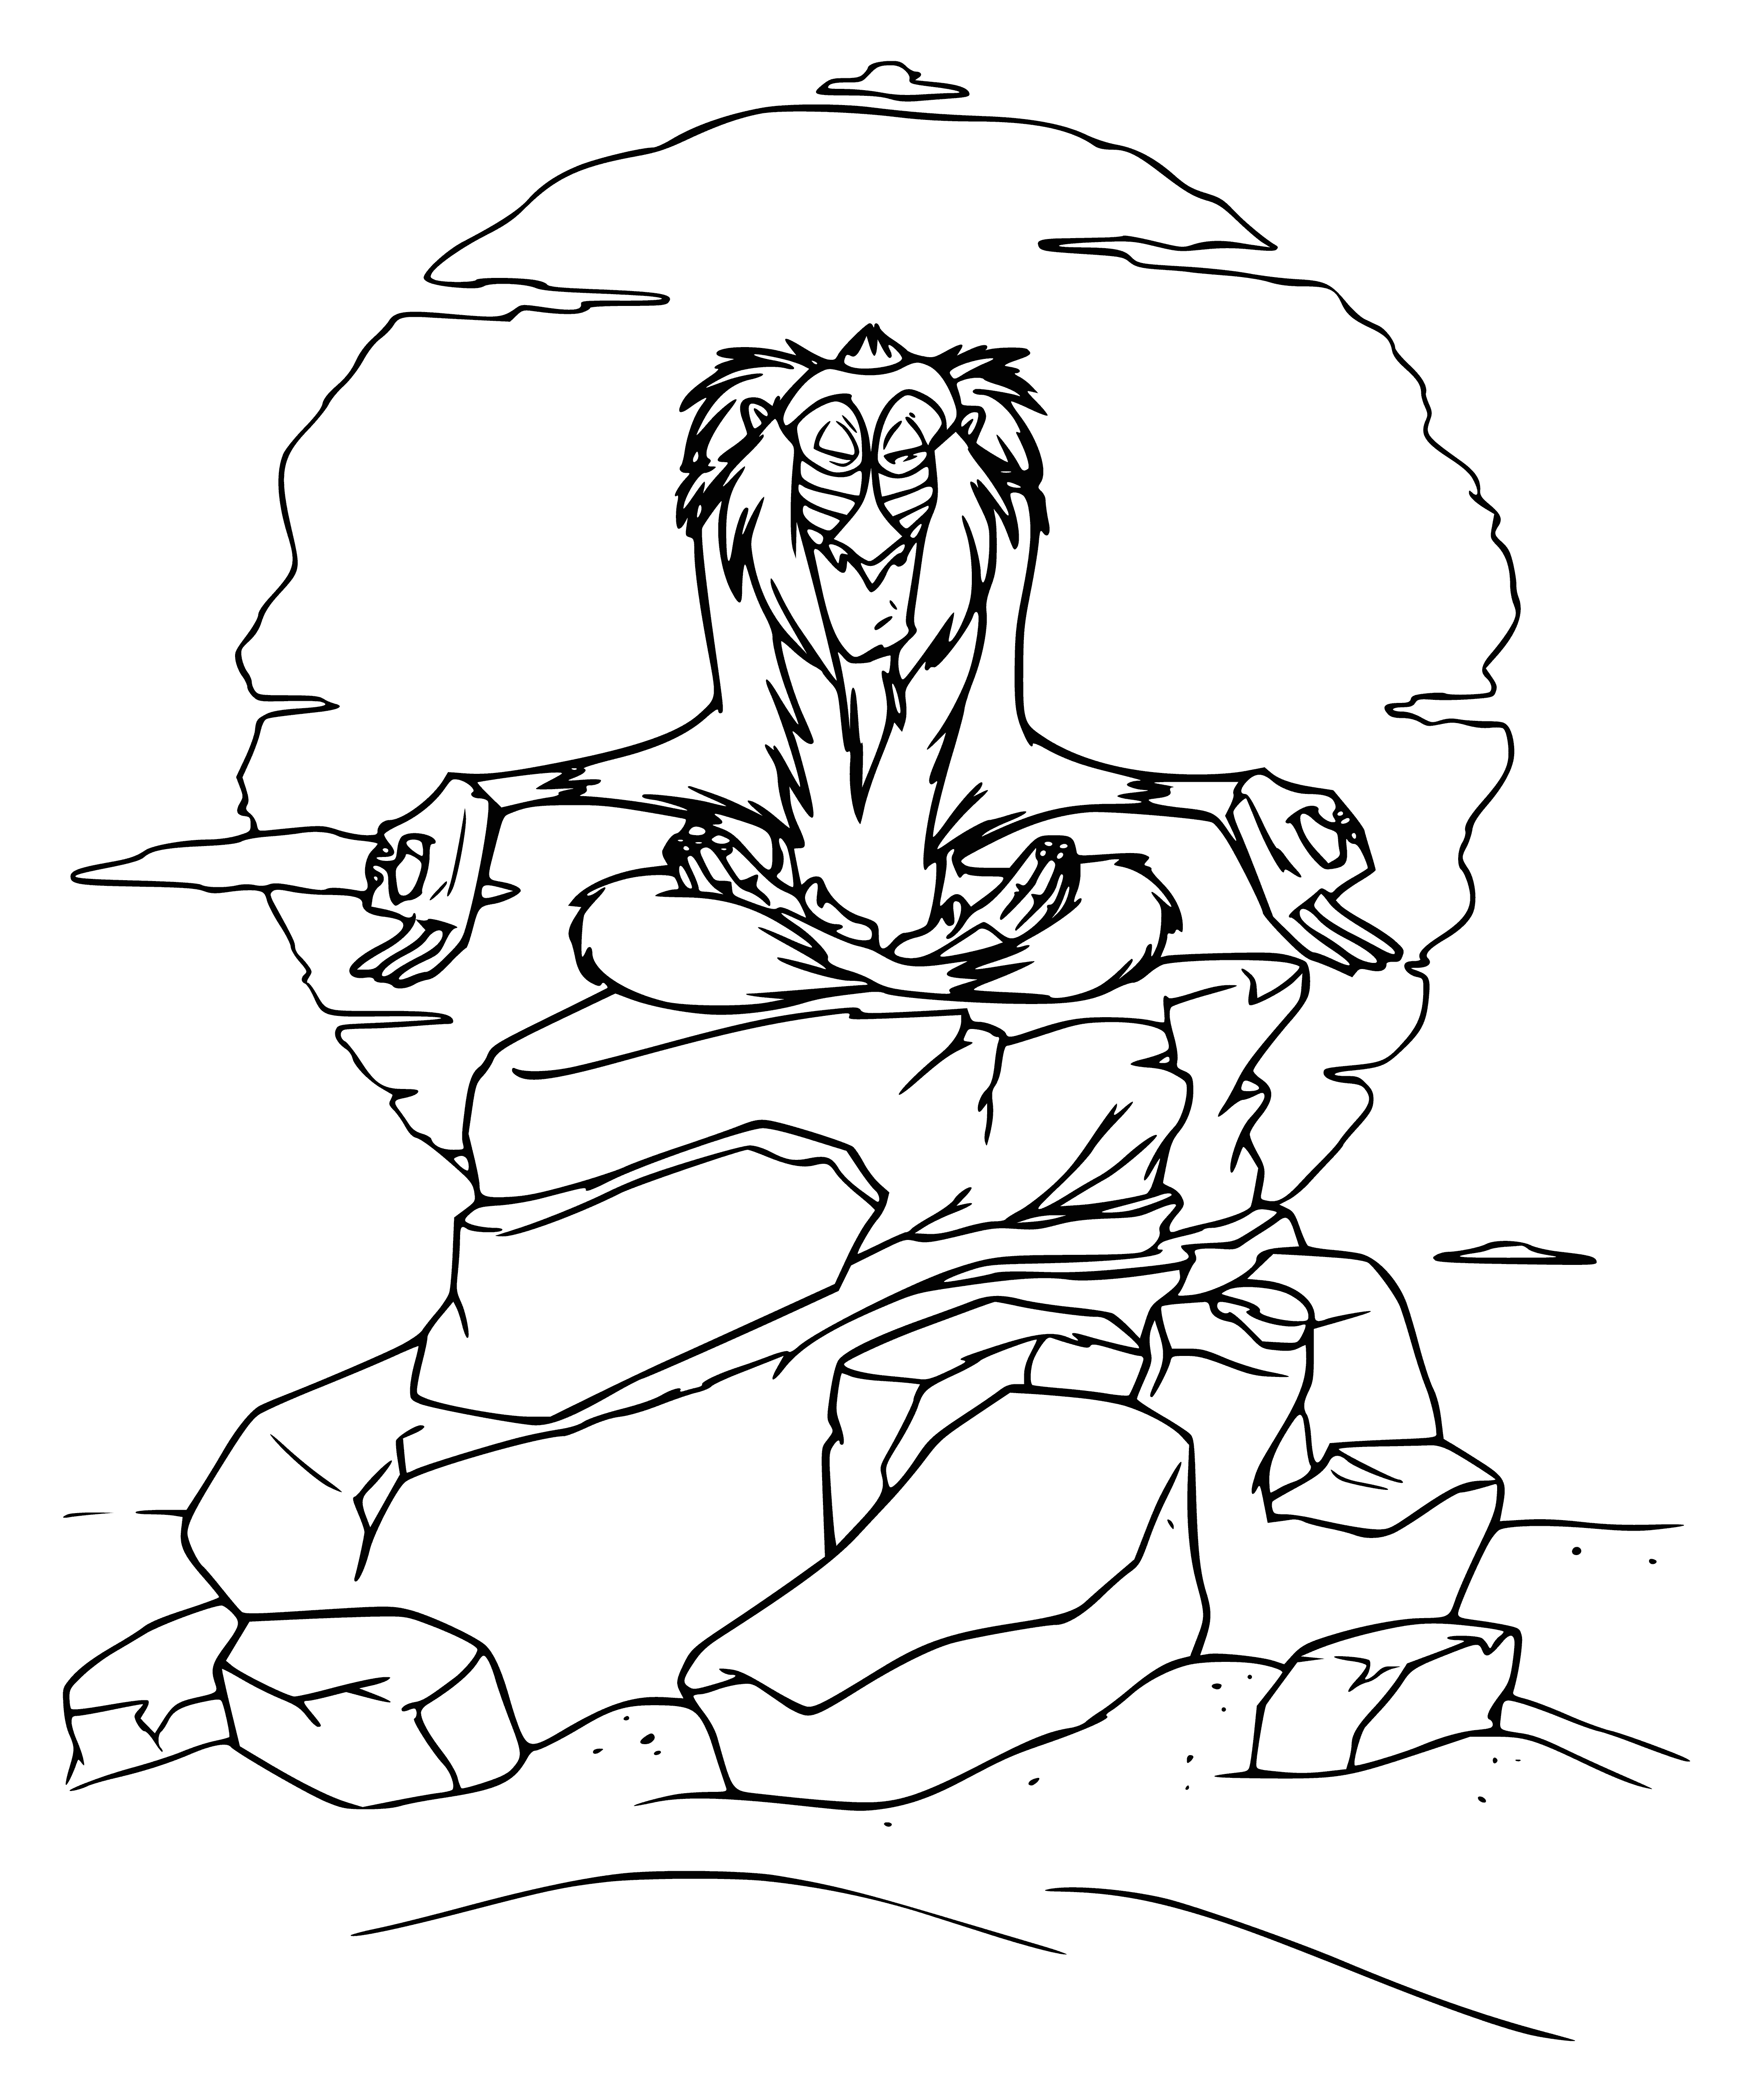 coloring page: Rafiki, the proud lion, stands atop a rock at sunset, mane blowing in the wind. Beautiful!